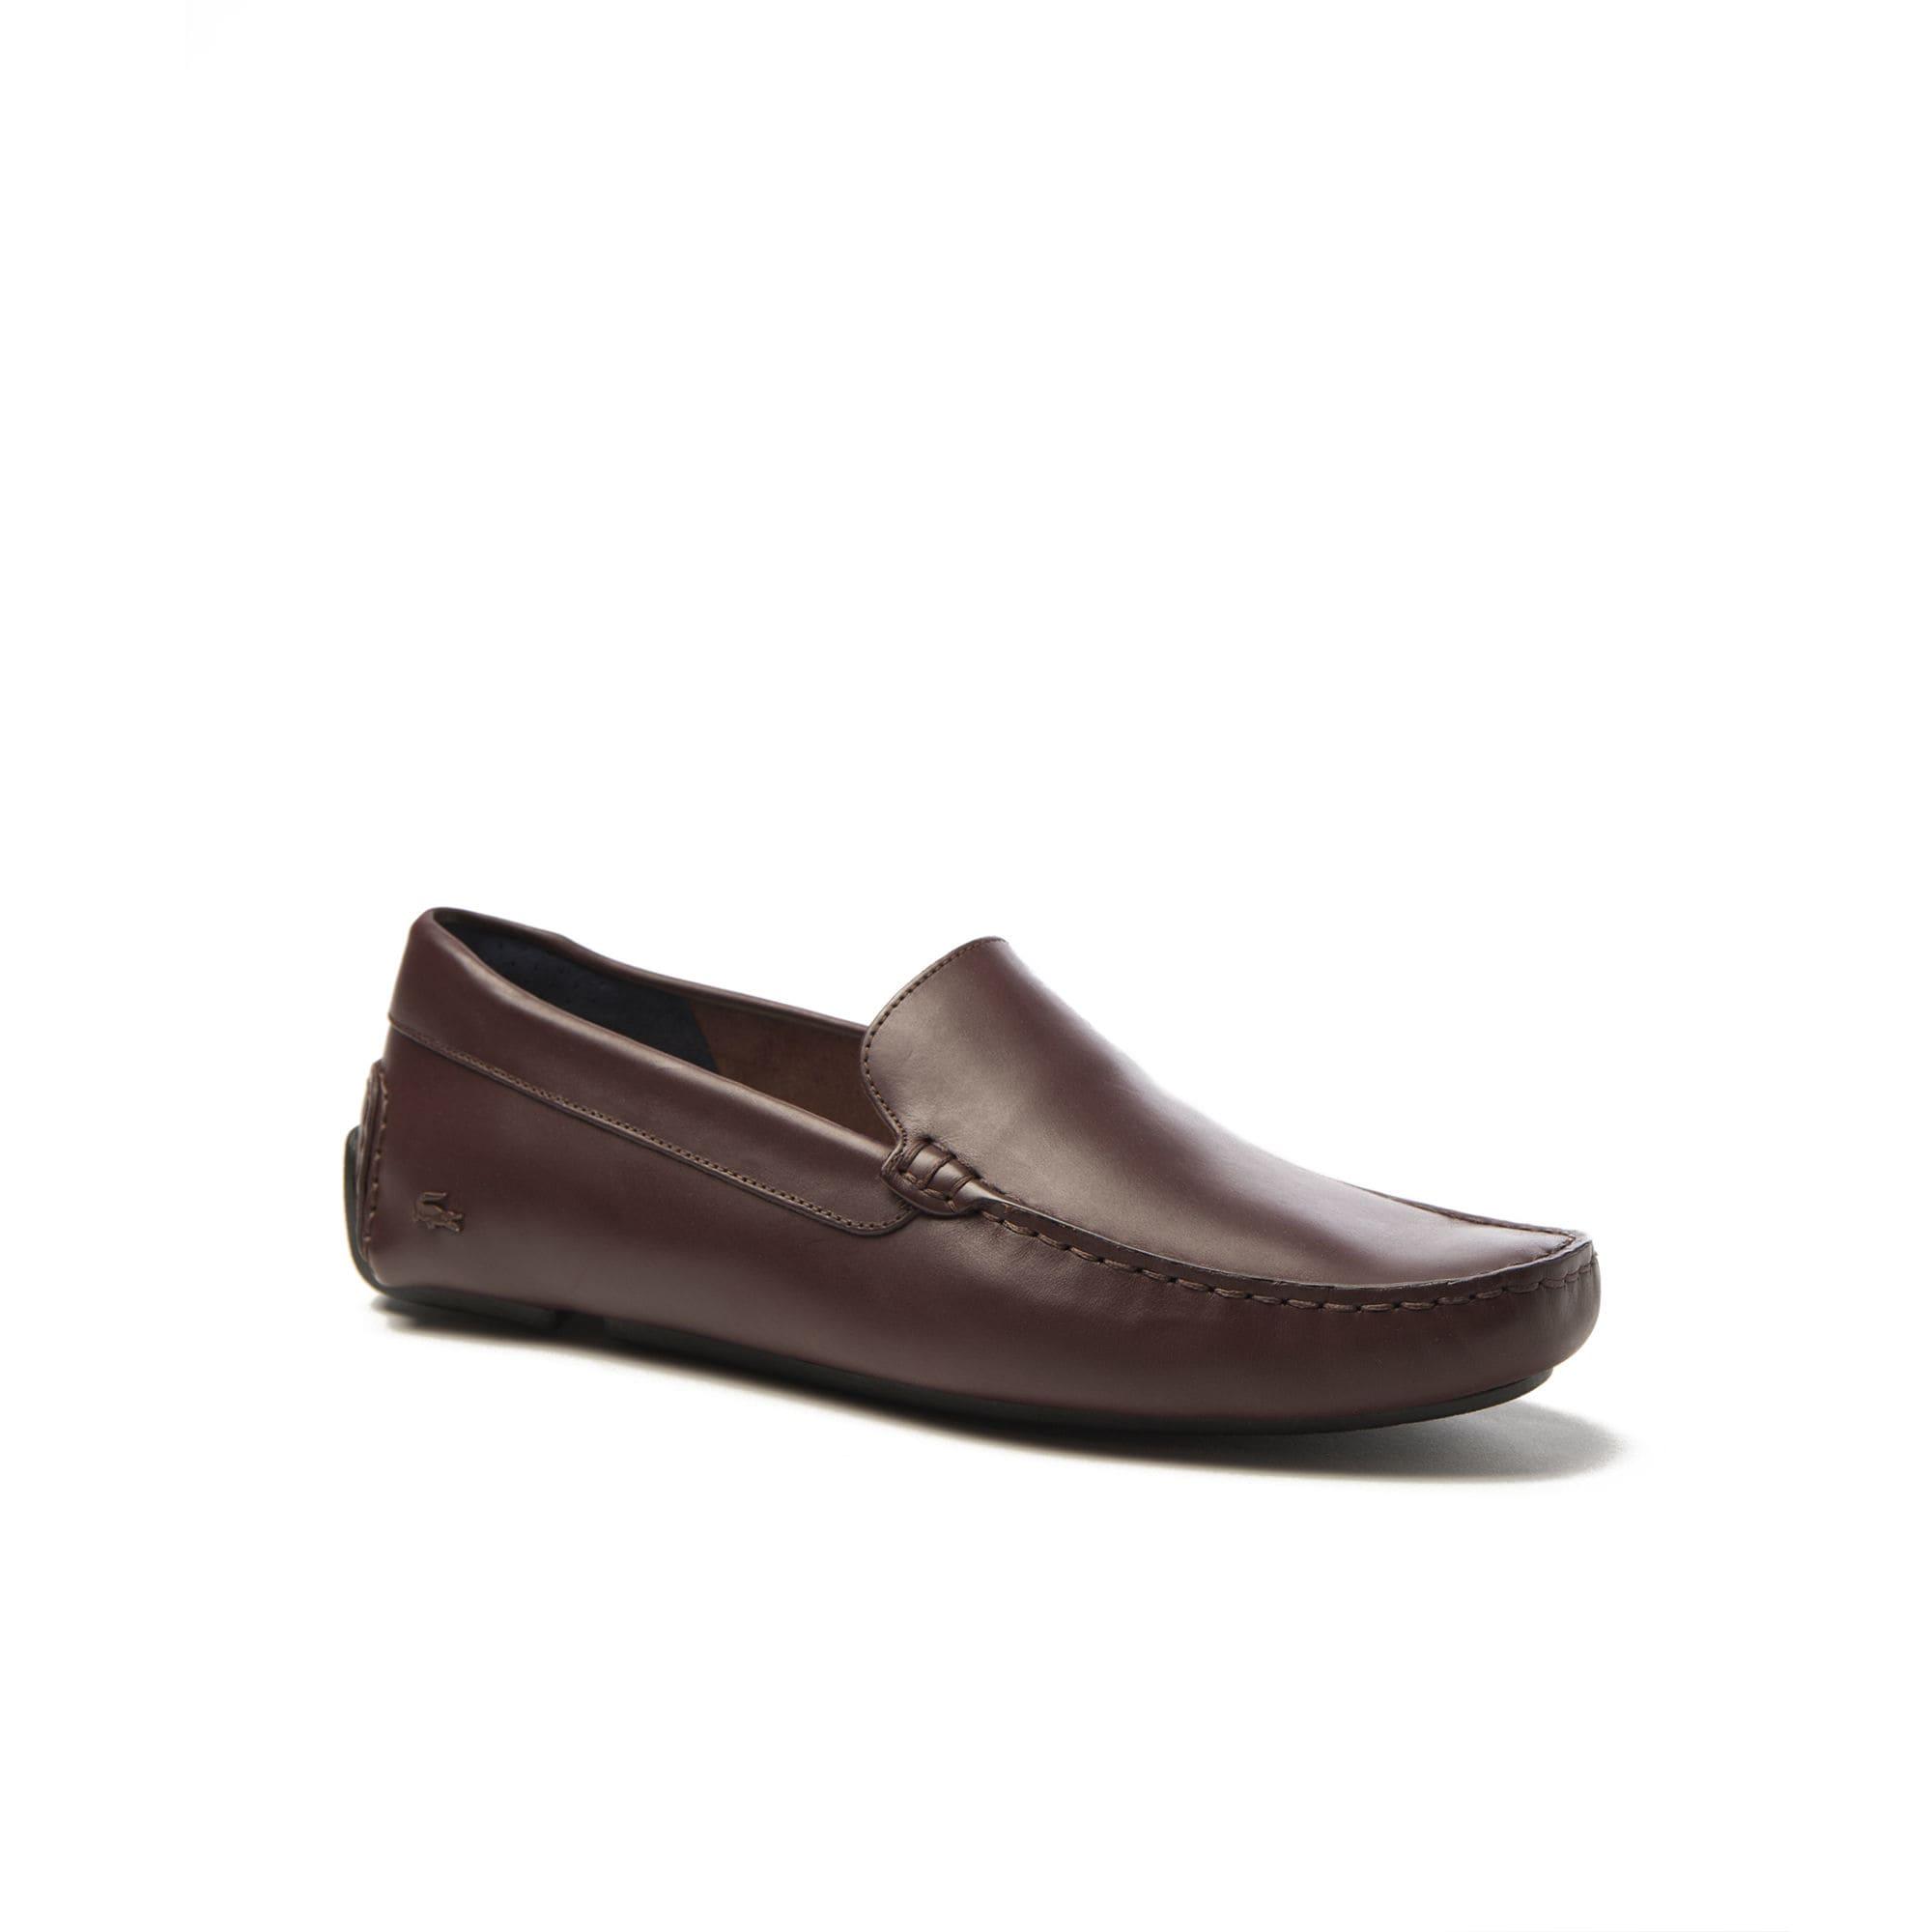 Lacoste Piloter Leather Moccasins in Dark Brown (Brown) for Men - Lyst